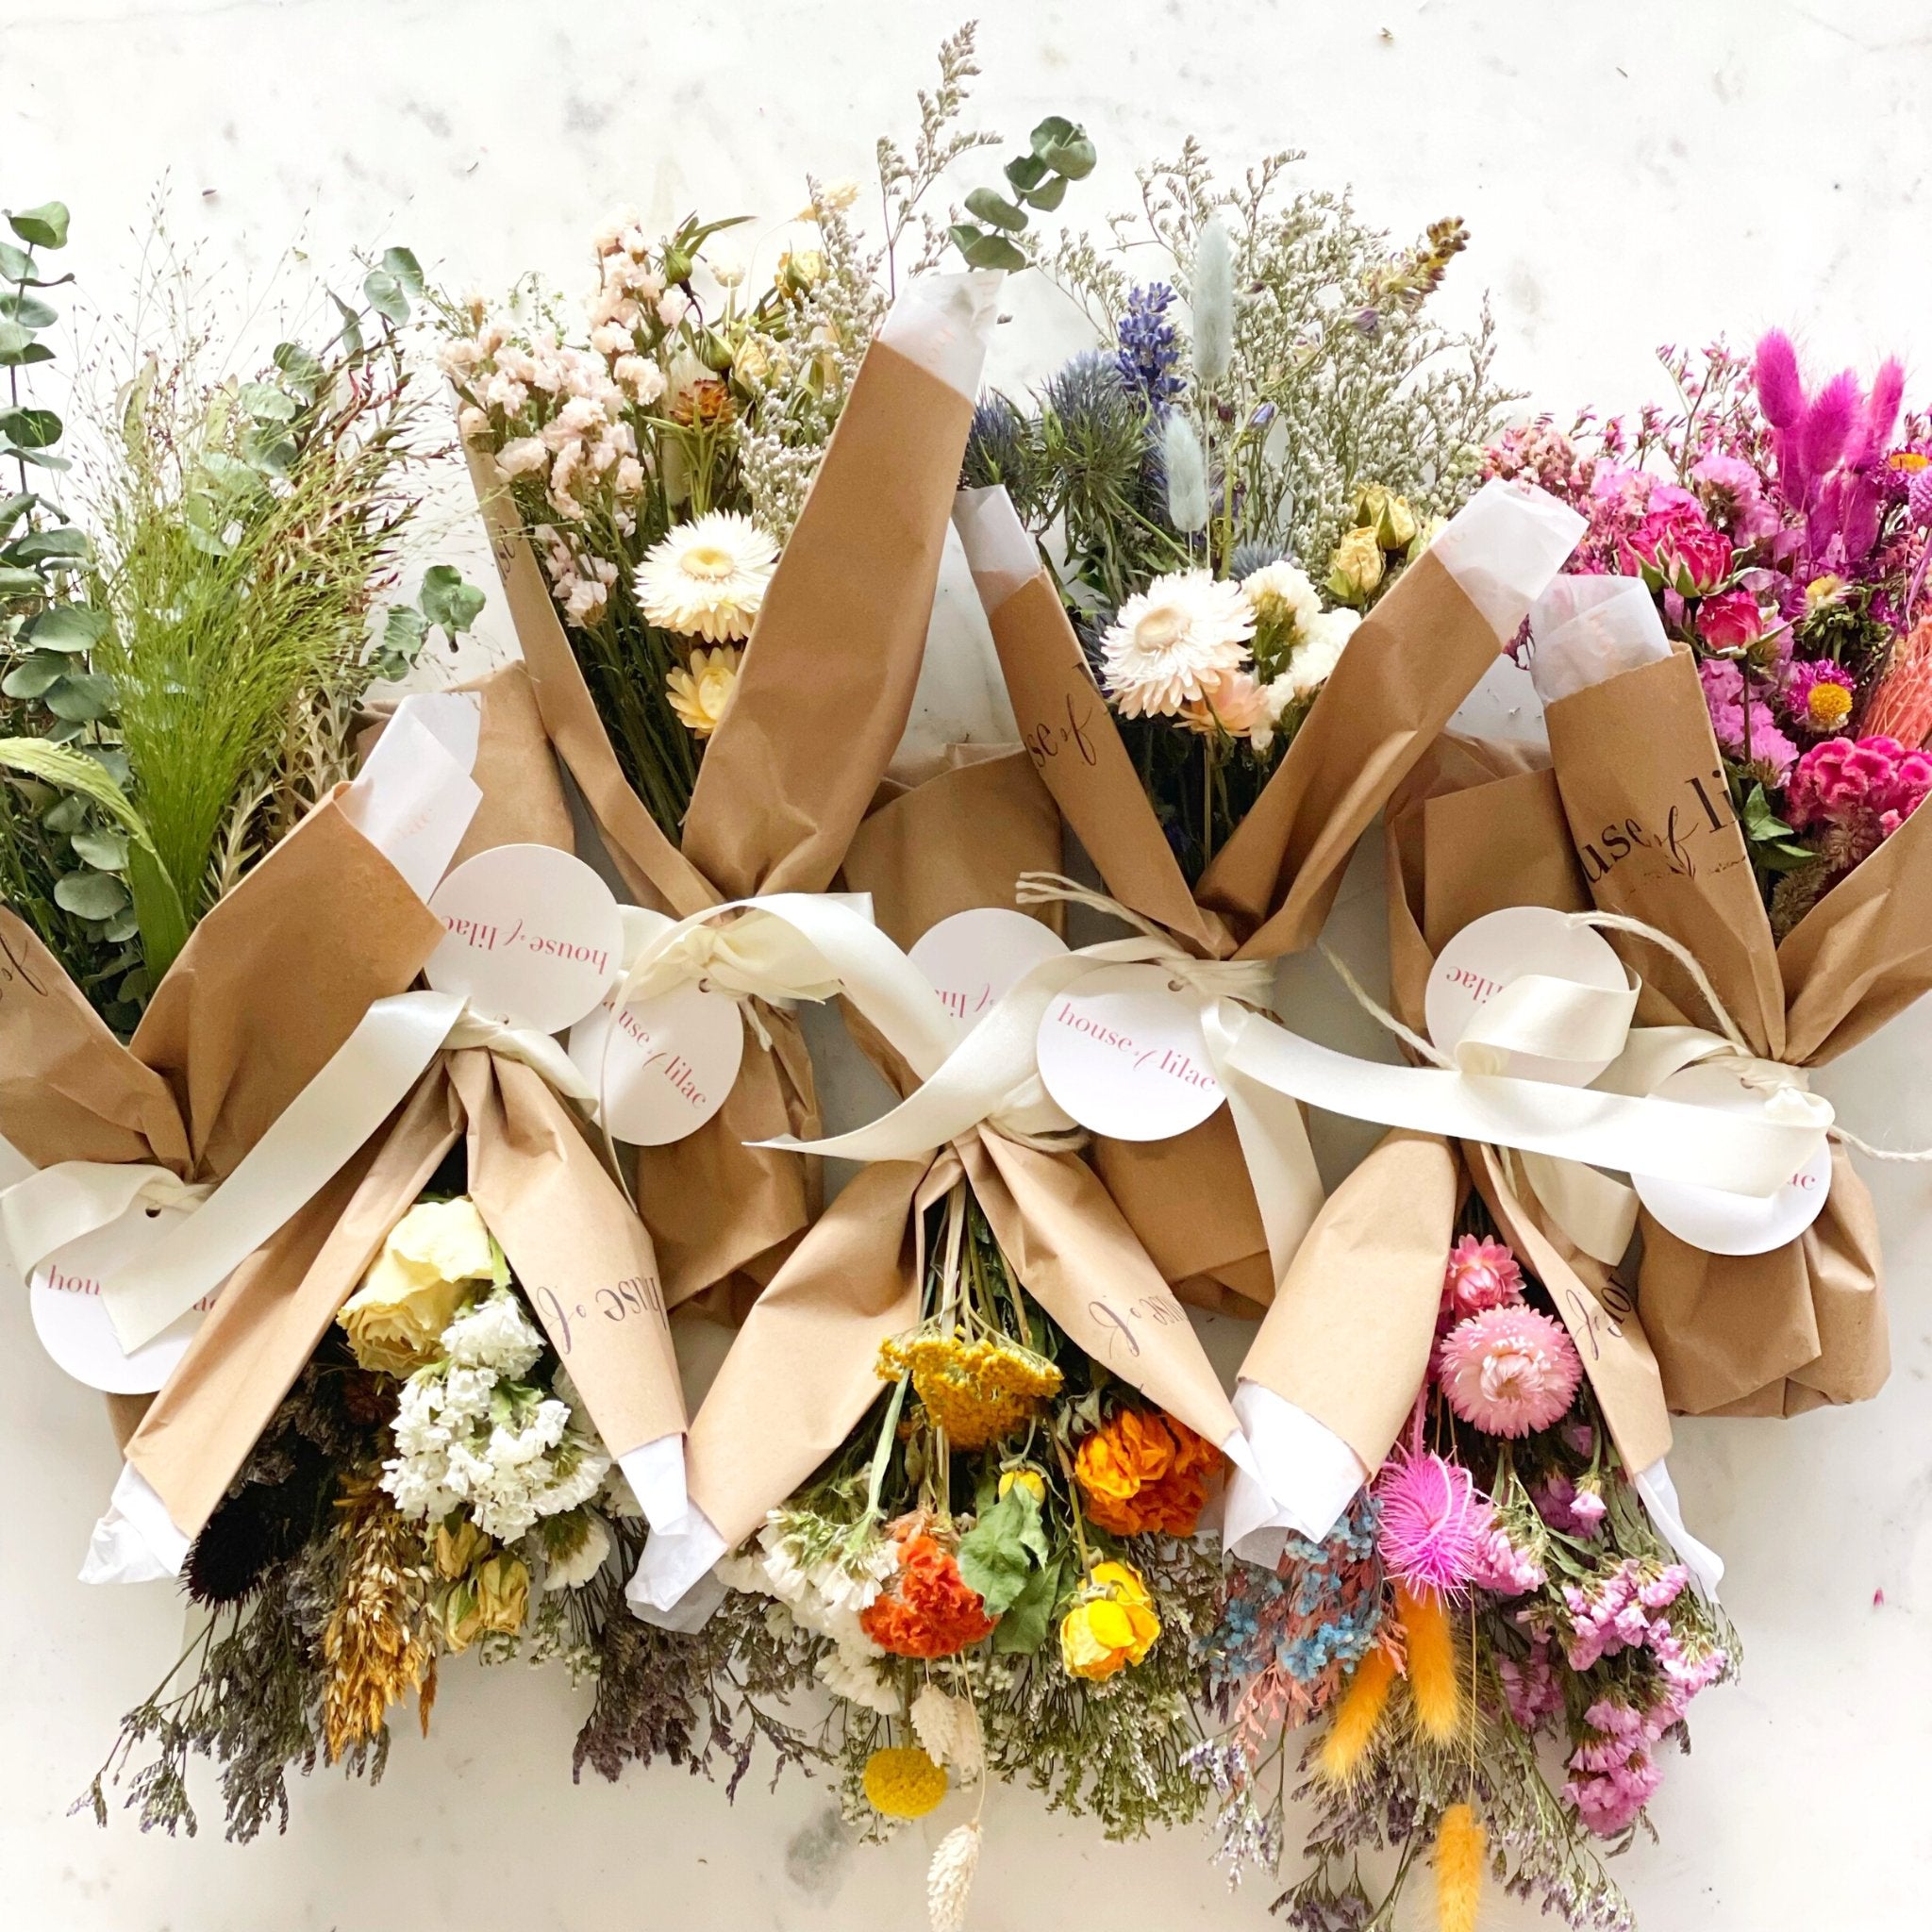 Flower bouquet wrapped in brown paper kept hand Vector Image